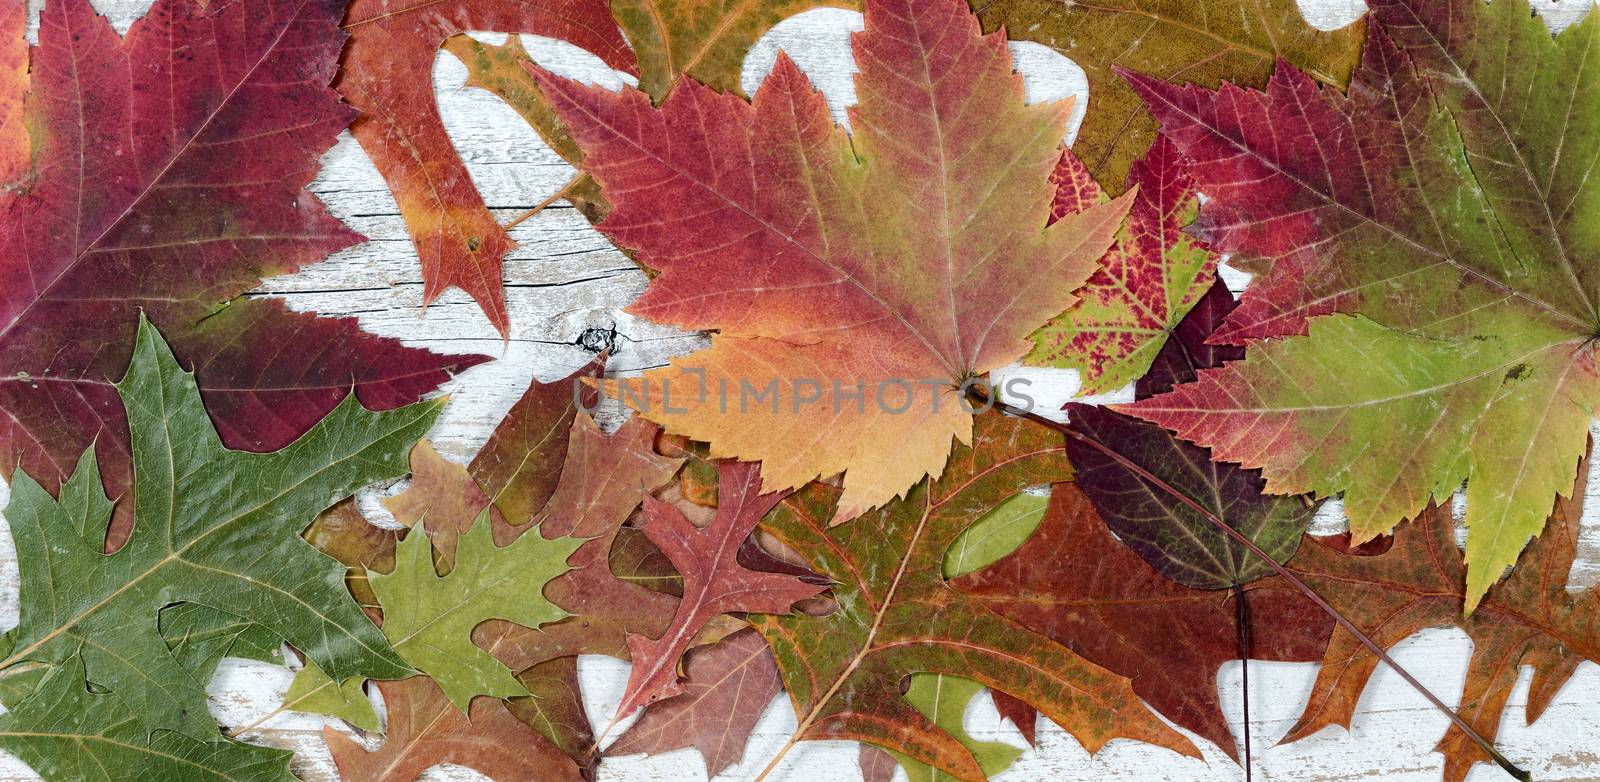 Autumn foliage in filled frame format on rustic white wood